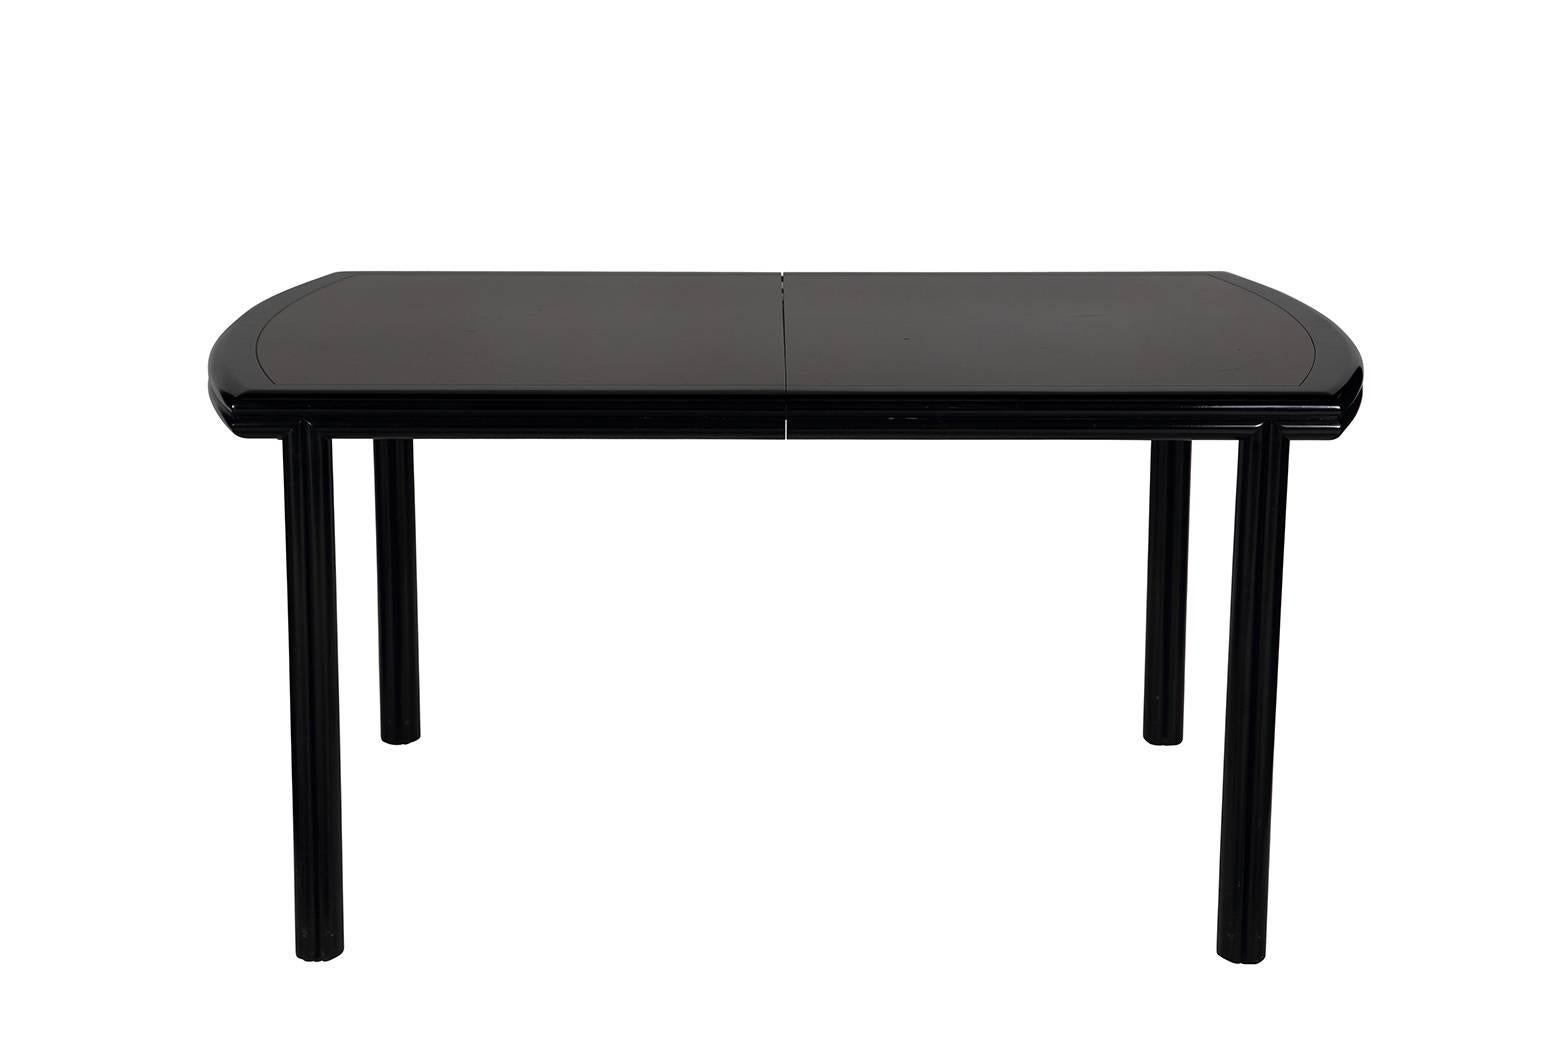 Vintage glossy black lacquered dining table with brown wood inlay. The piece has two leaves (18